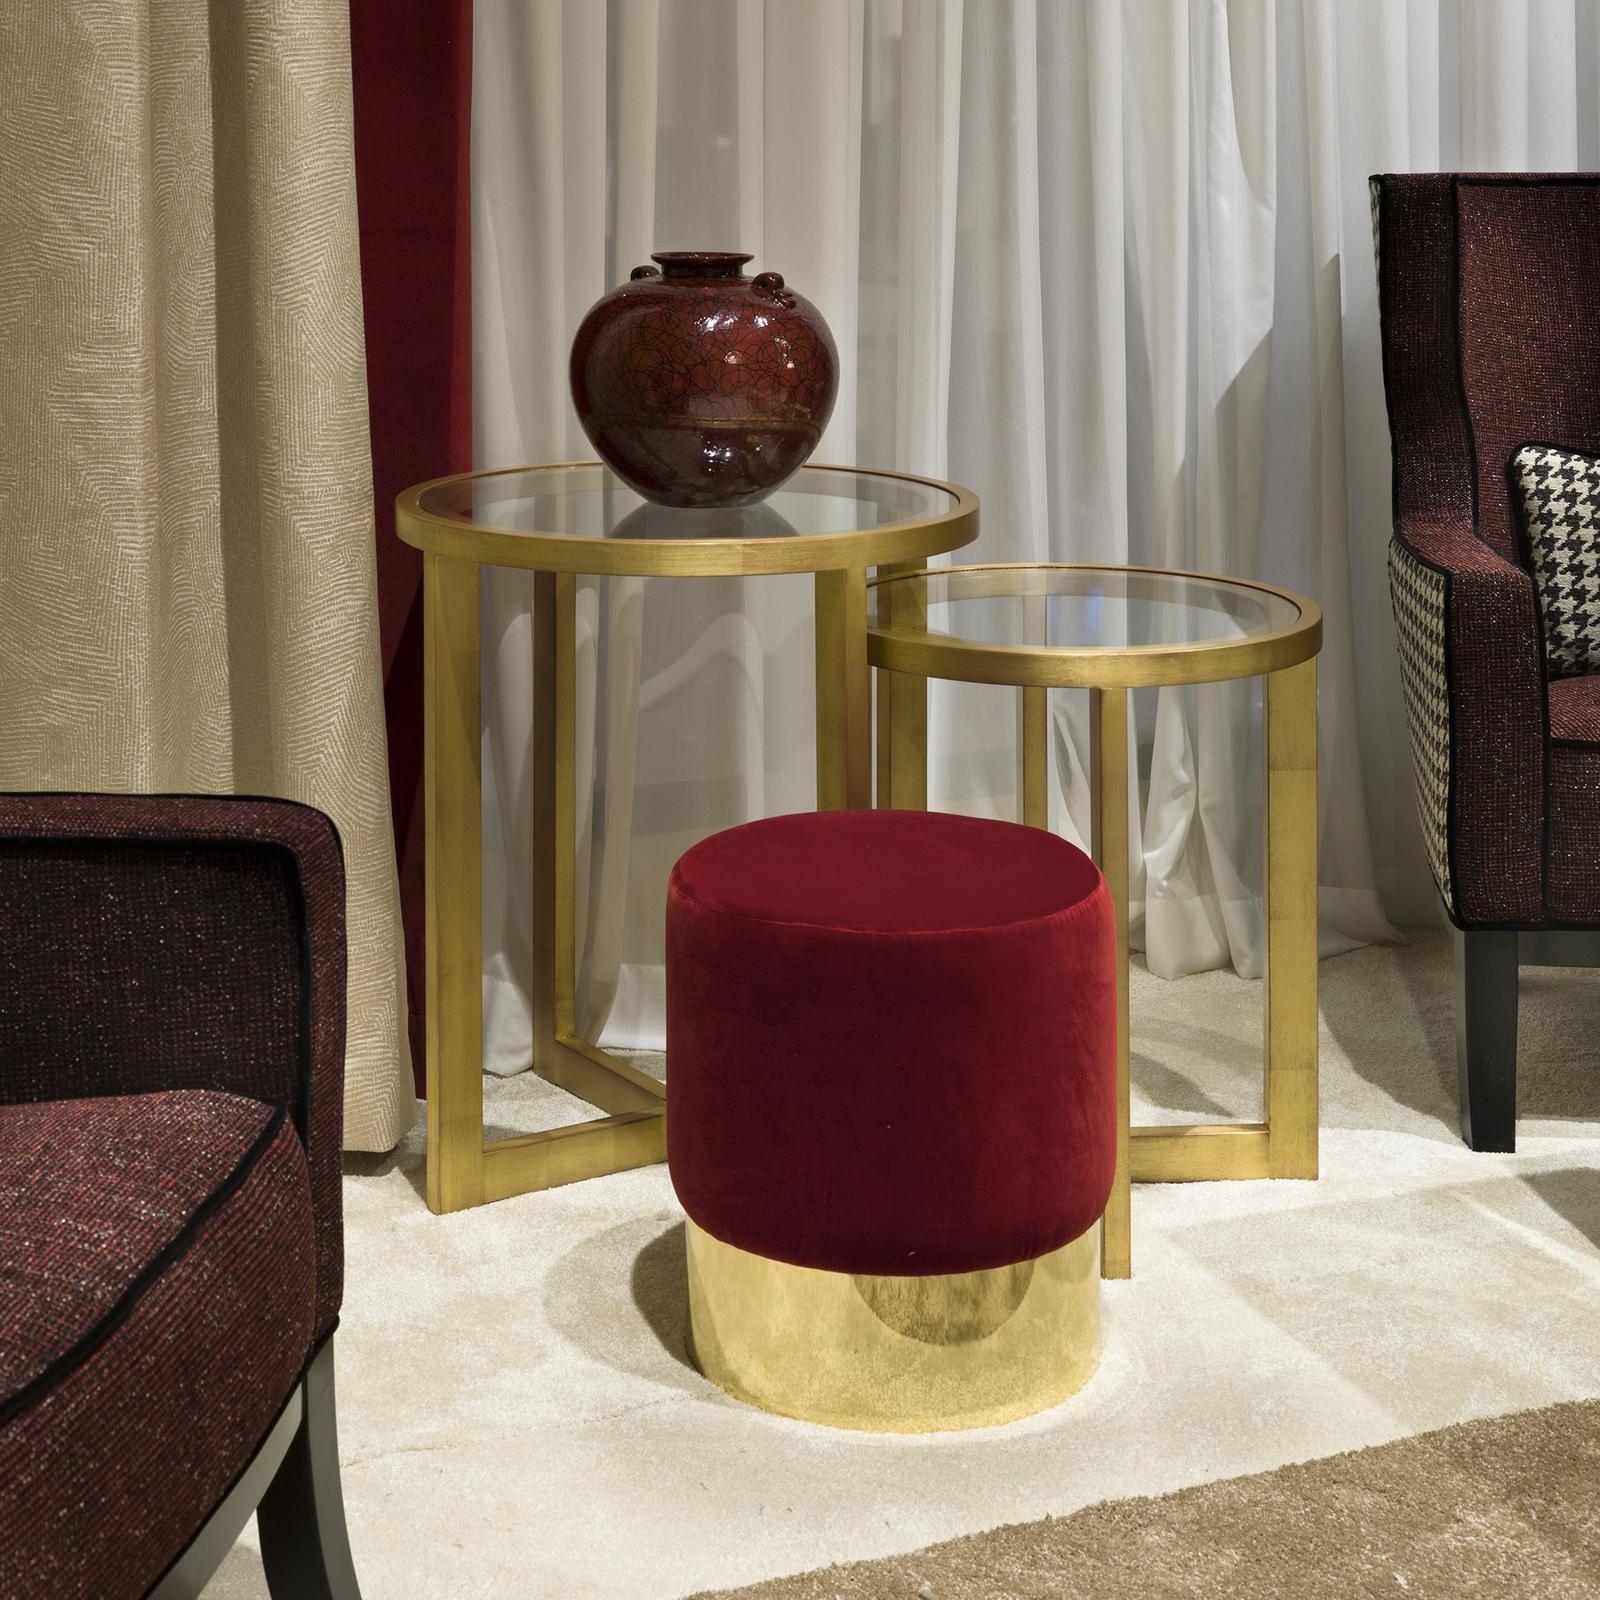 A piece that is sure to make a statement in a Classic or modern decor, this pouf is also a versatile object of functional decor that can be used as elegant stool in an entryway or extra seating in a living room. The cylindrical silhouette features a